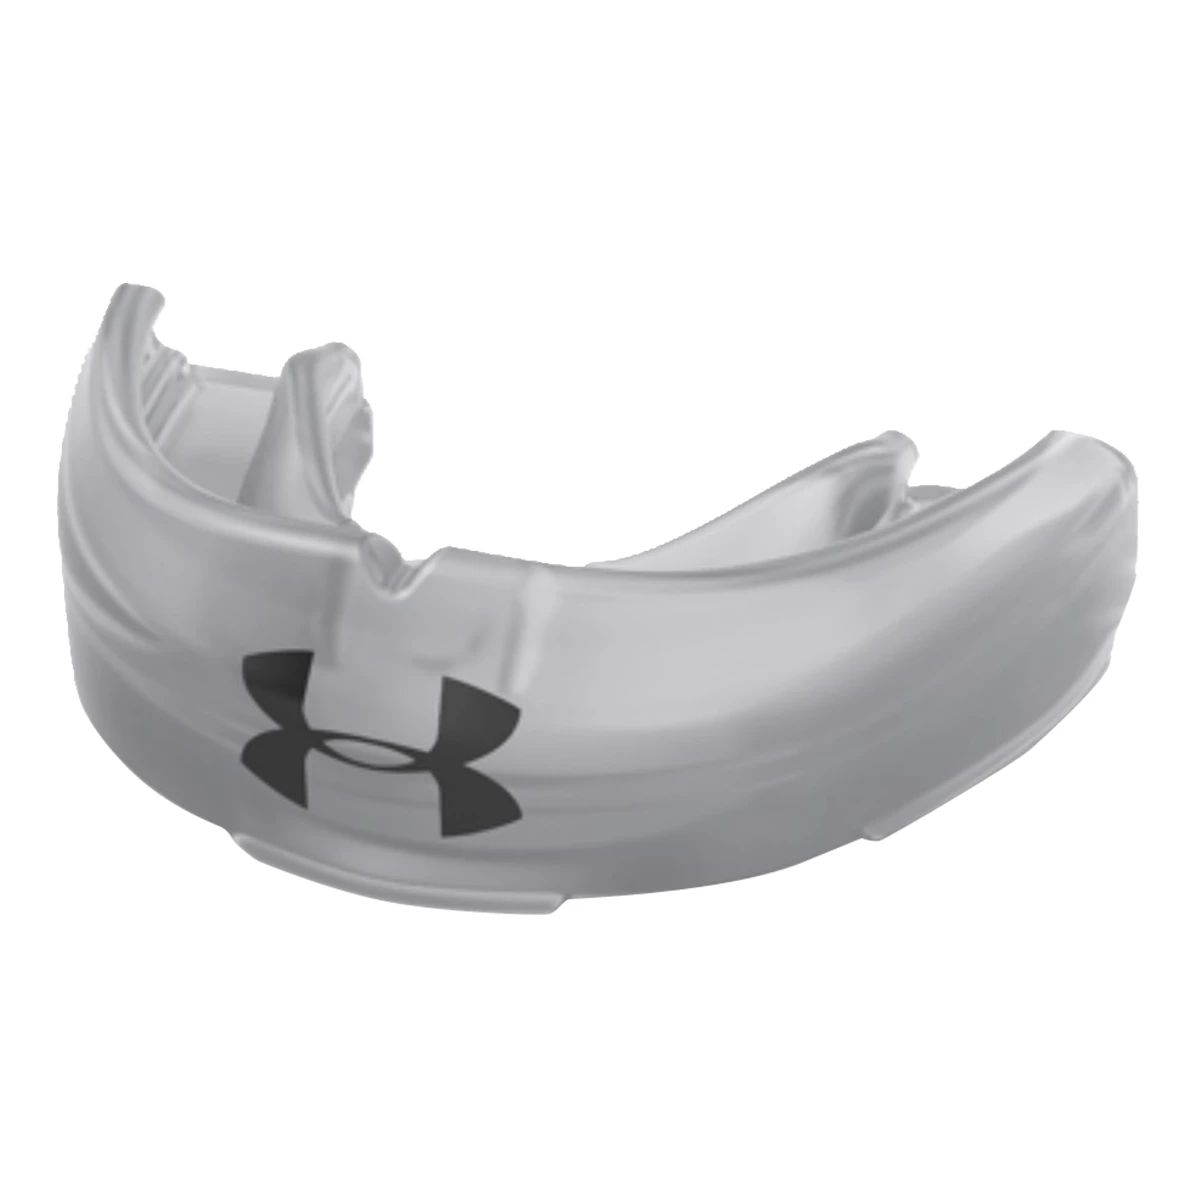 Under Armour Adult Braces Mouthguard - Strapless